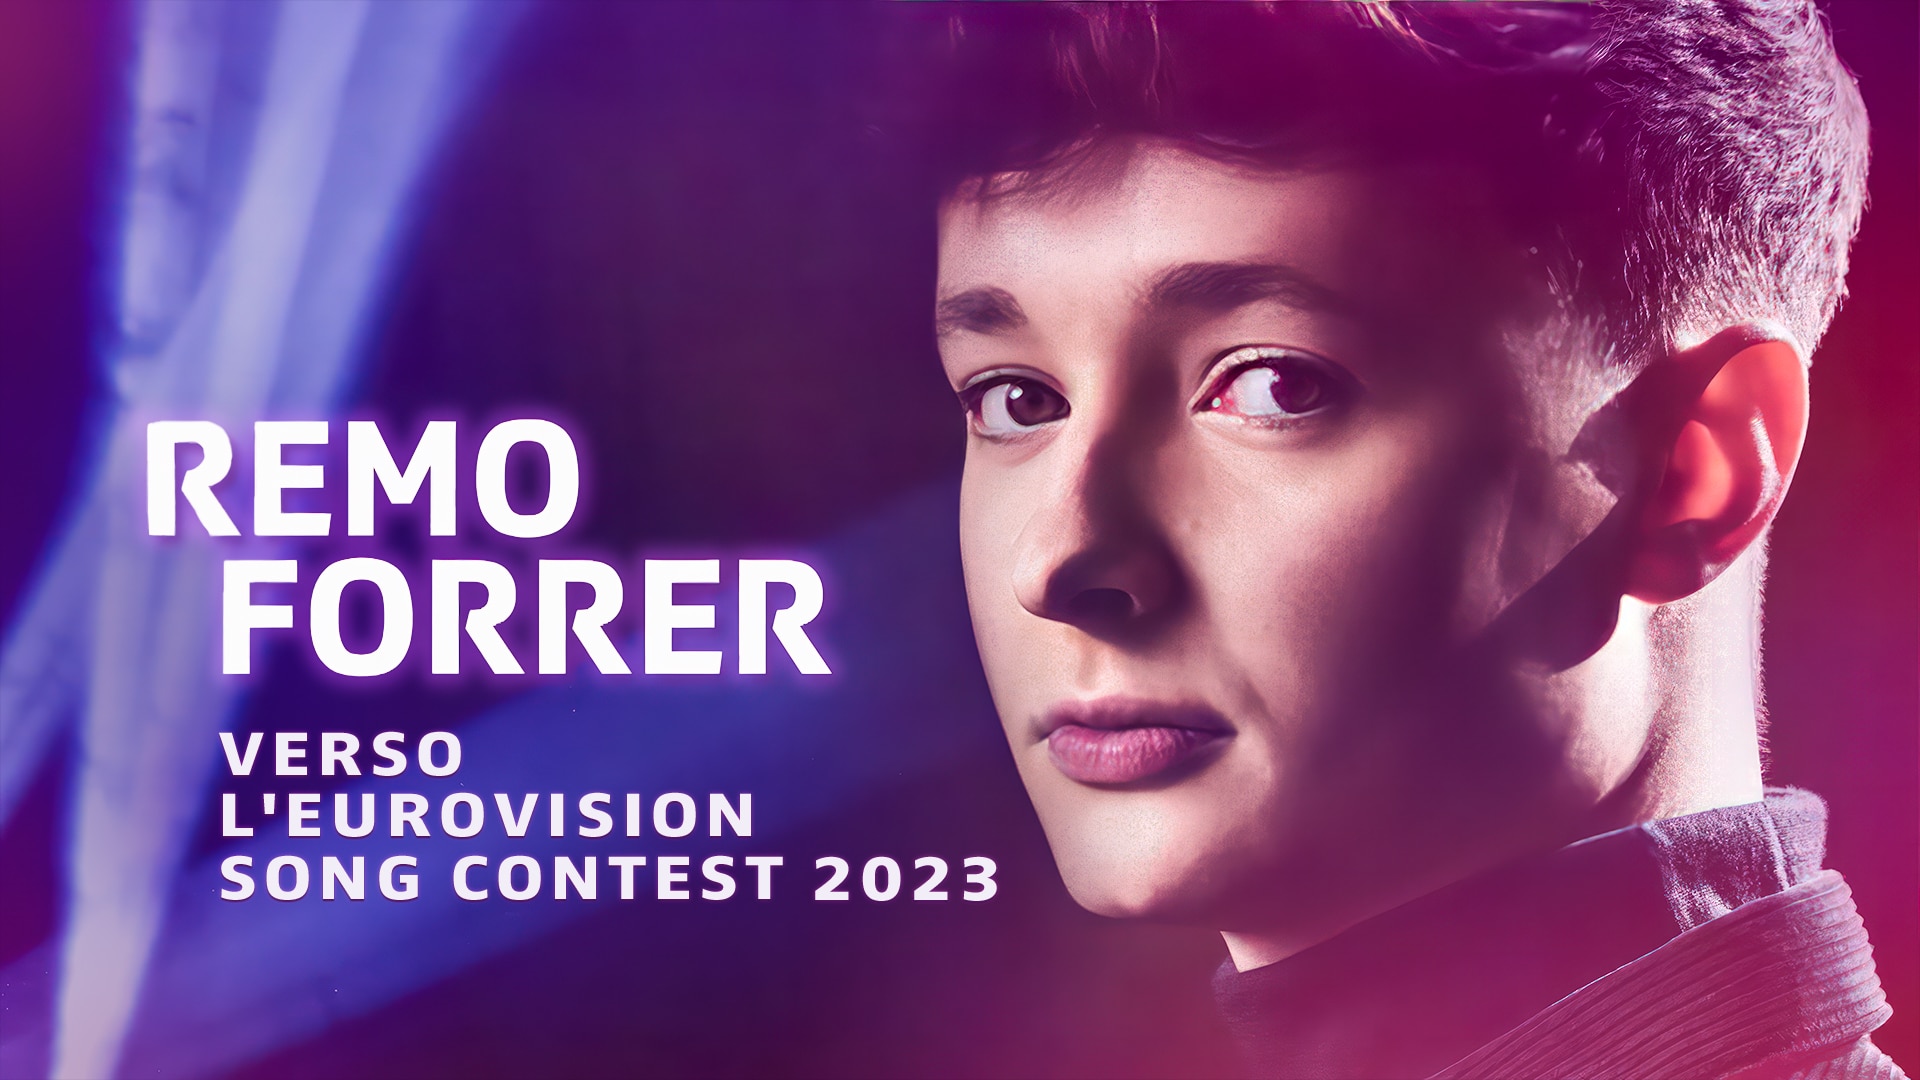 Remo Forrer - Verso l'Eurovision Song Contest 2023